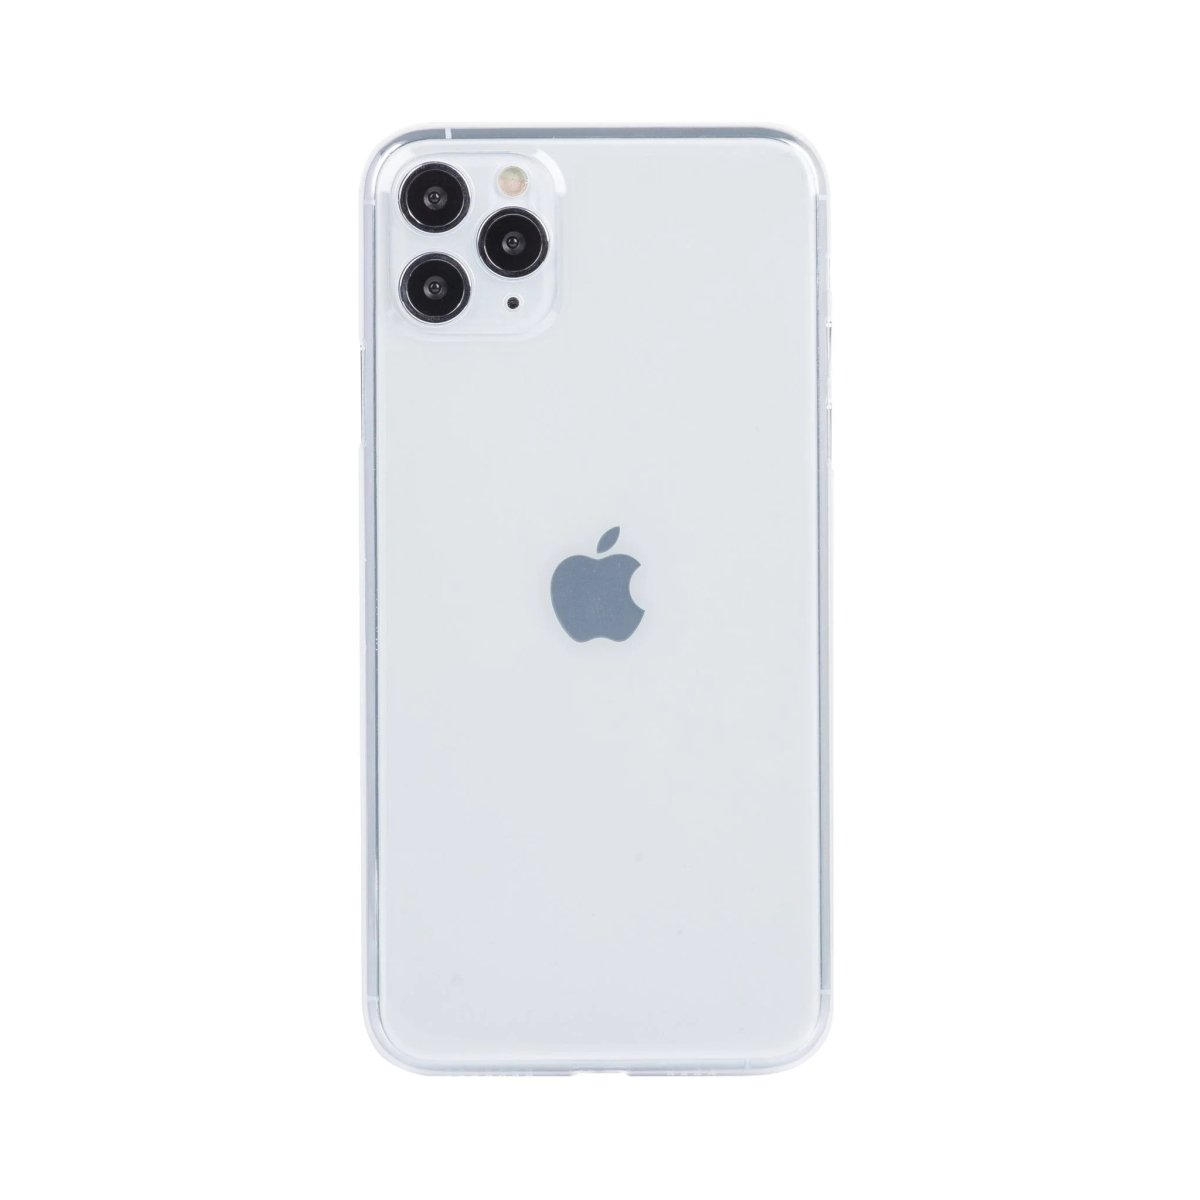 Slimcase Mobile Back Cover for iPhone 11 Pro Max - Slimcase IndiaCase